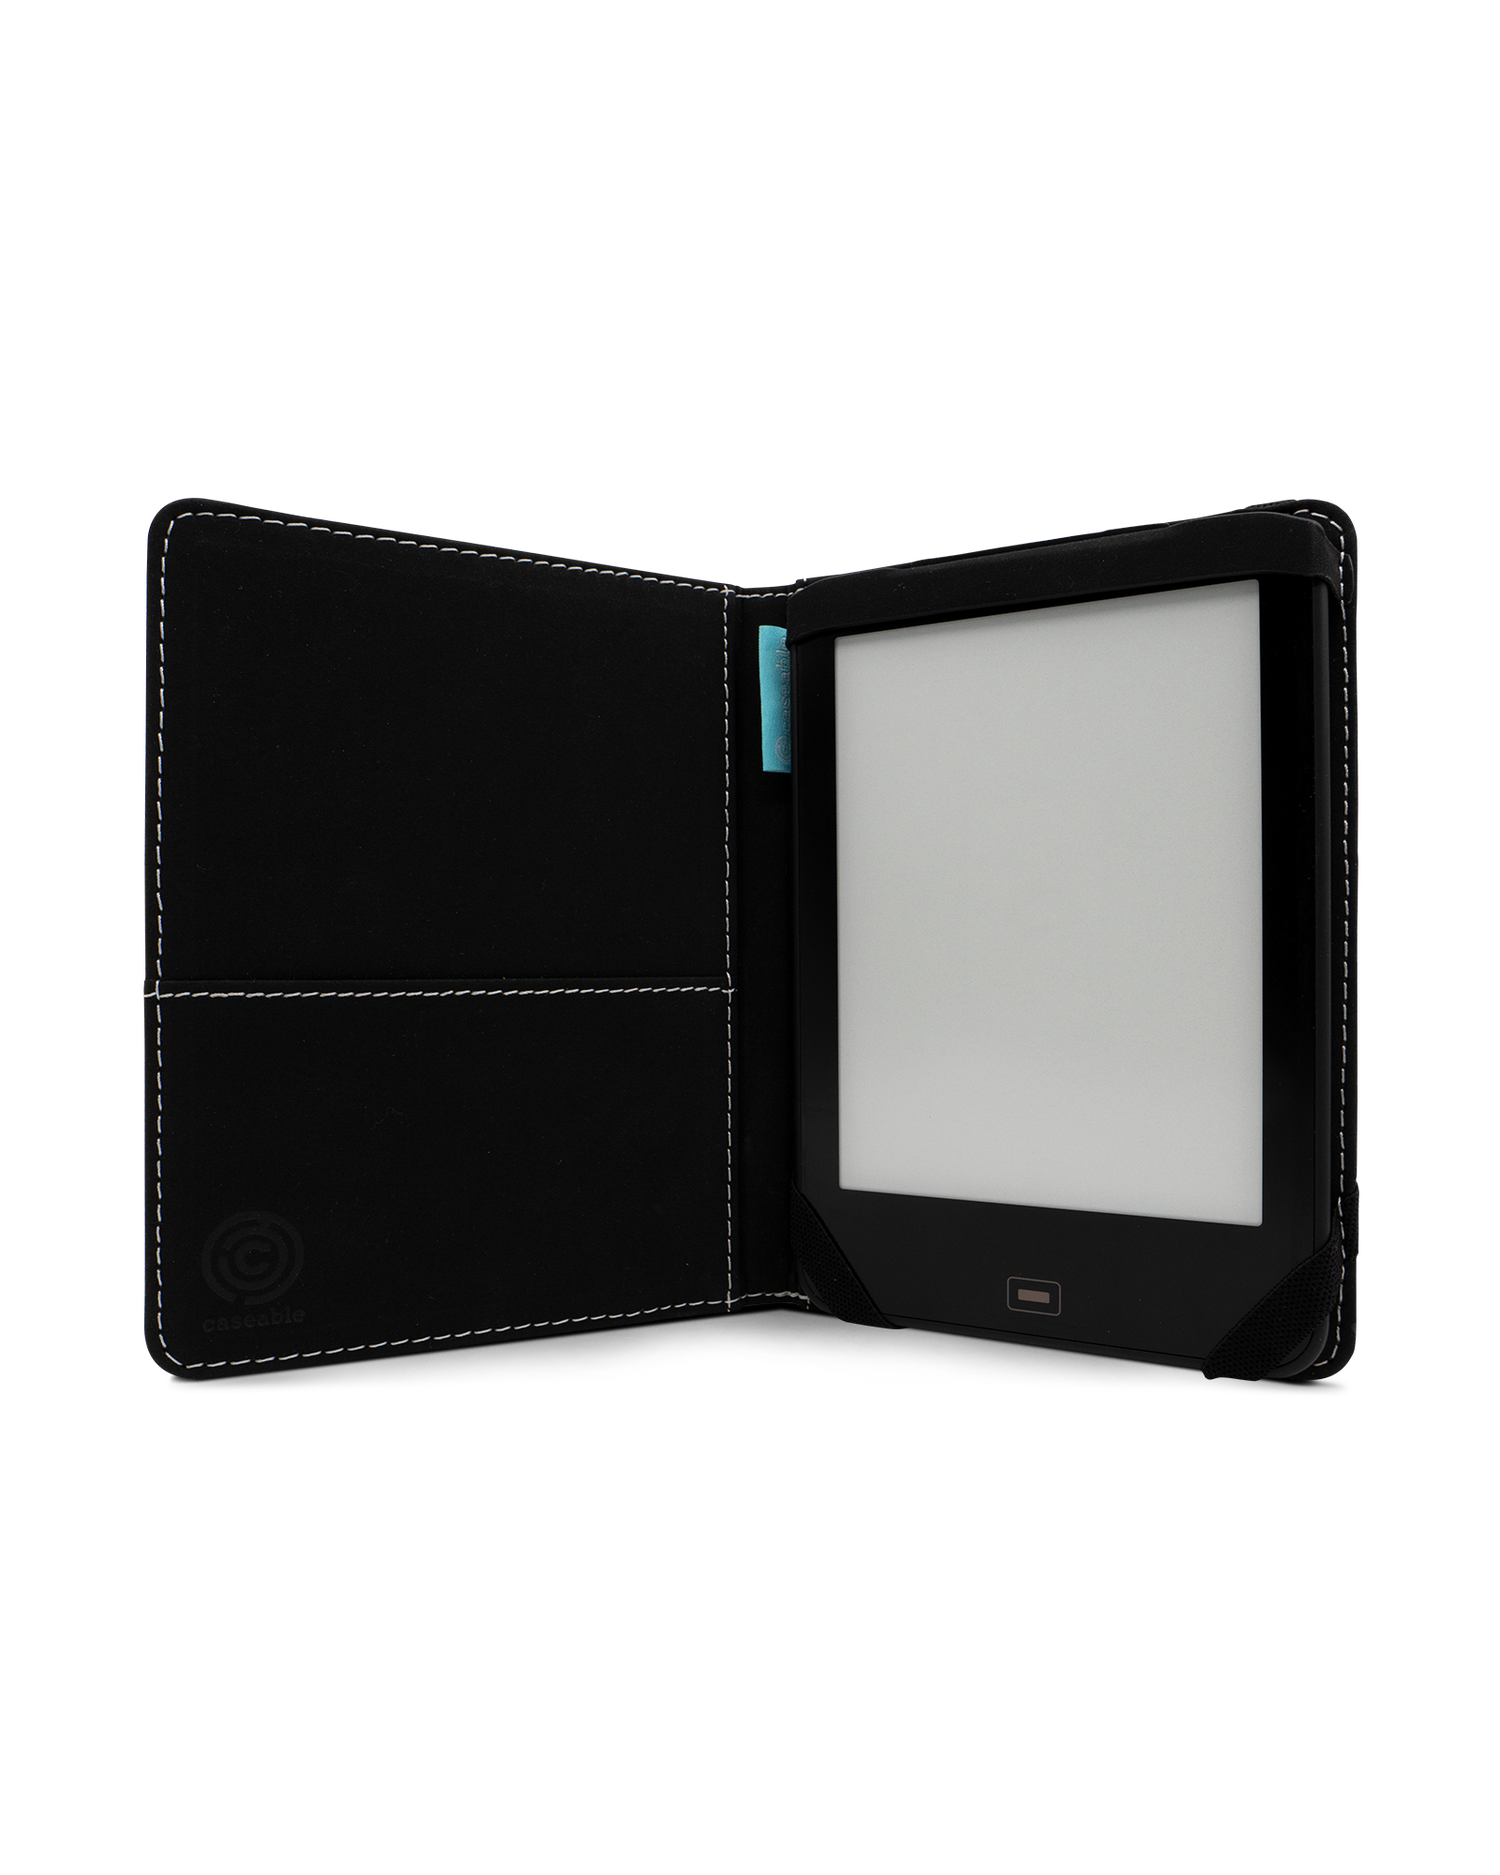 Cool Blues eReader Case for tolino vision 1 to 4 HD: Opened interior view